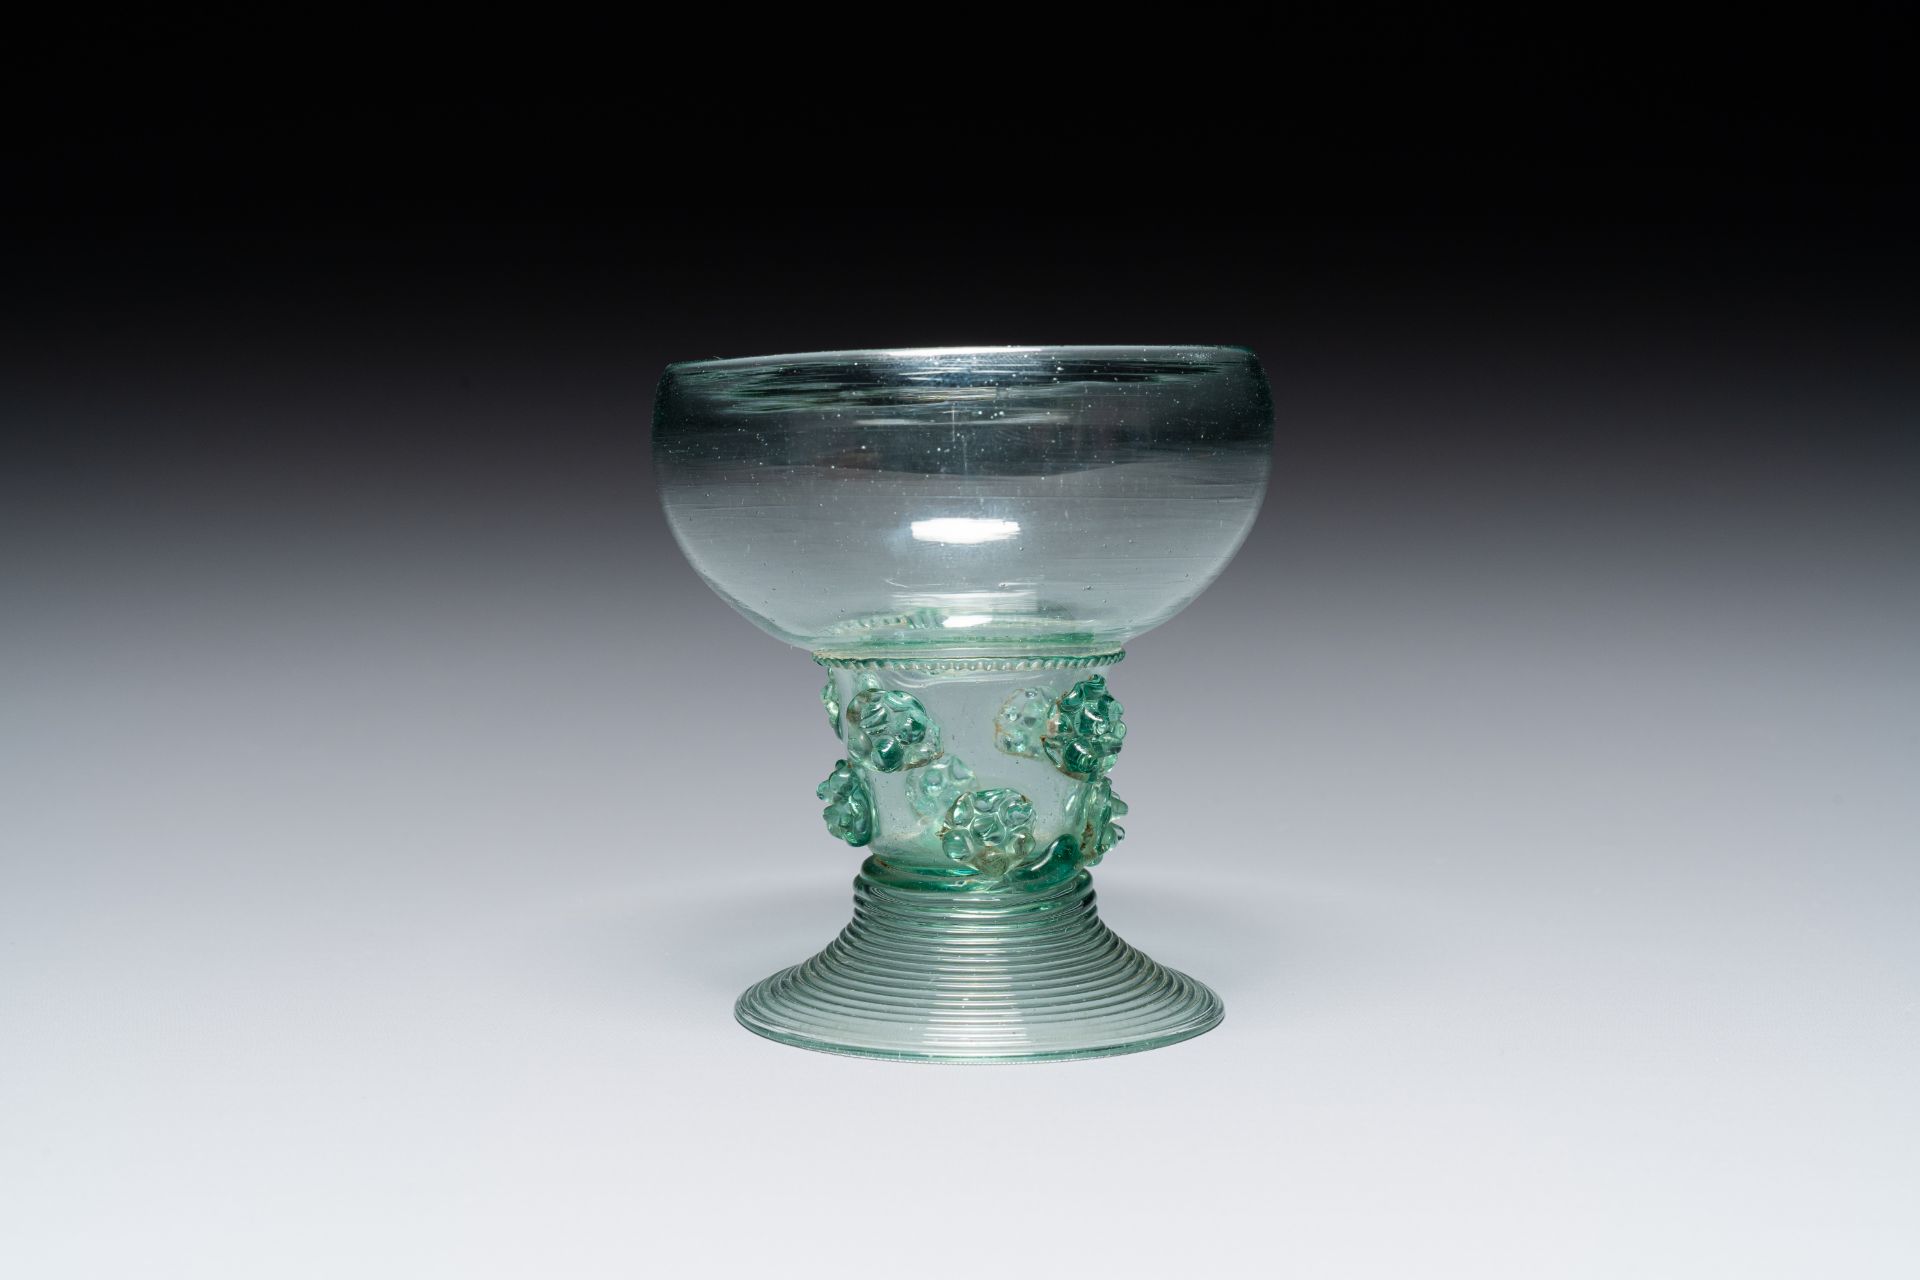 A Dutch or German green glass rummer, 2nd quarter of the 17th C. - Image 5 of 7